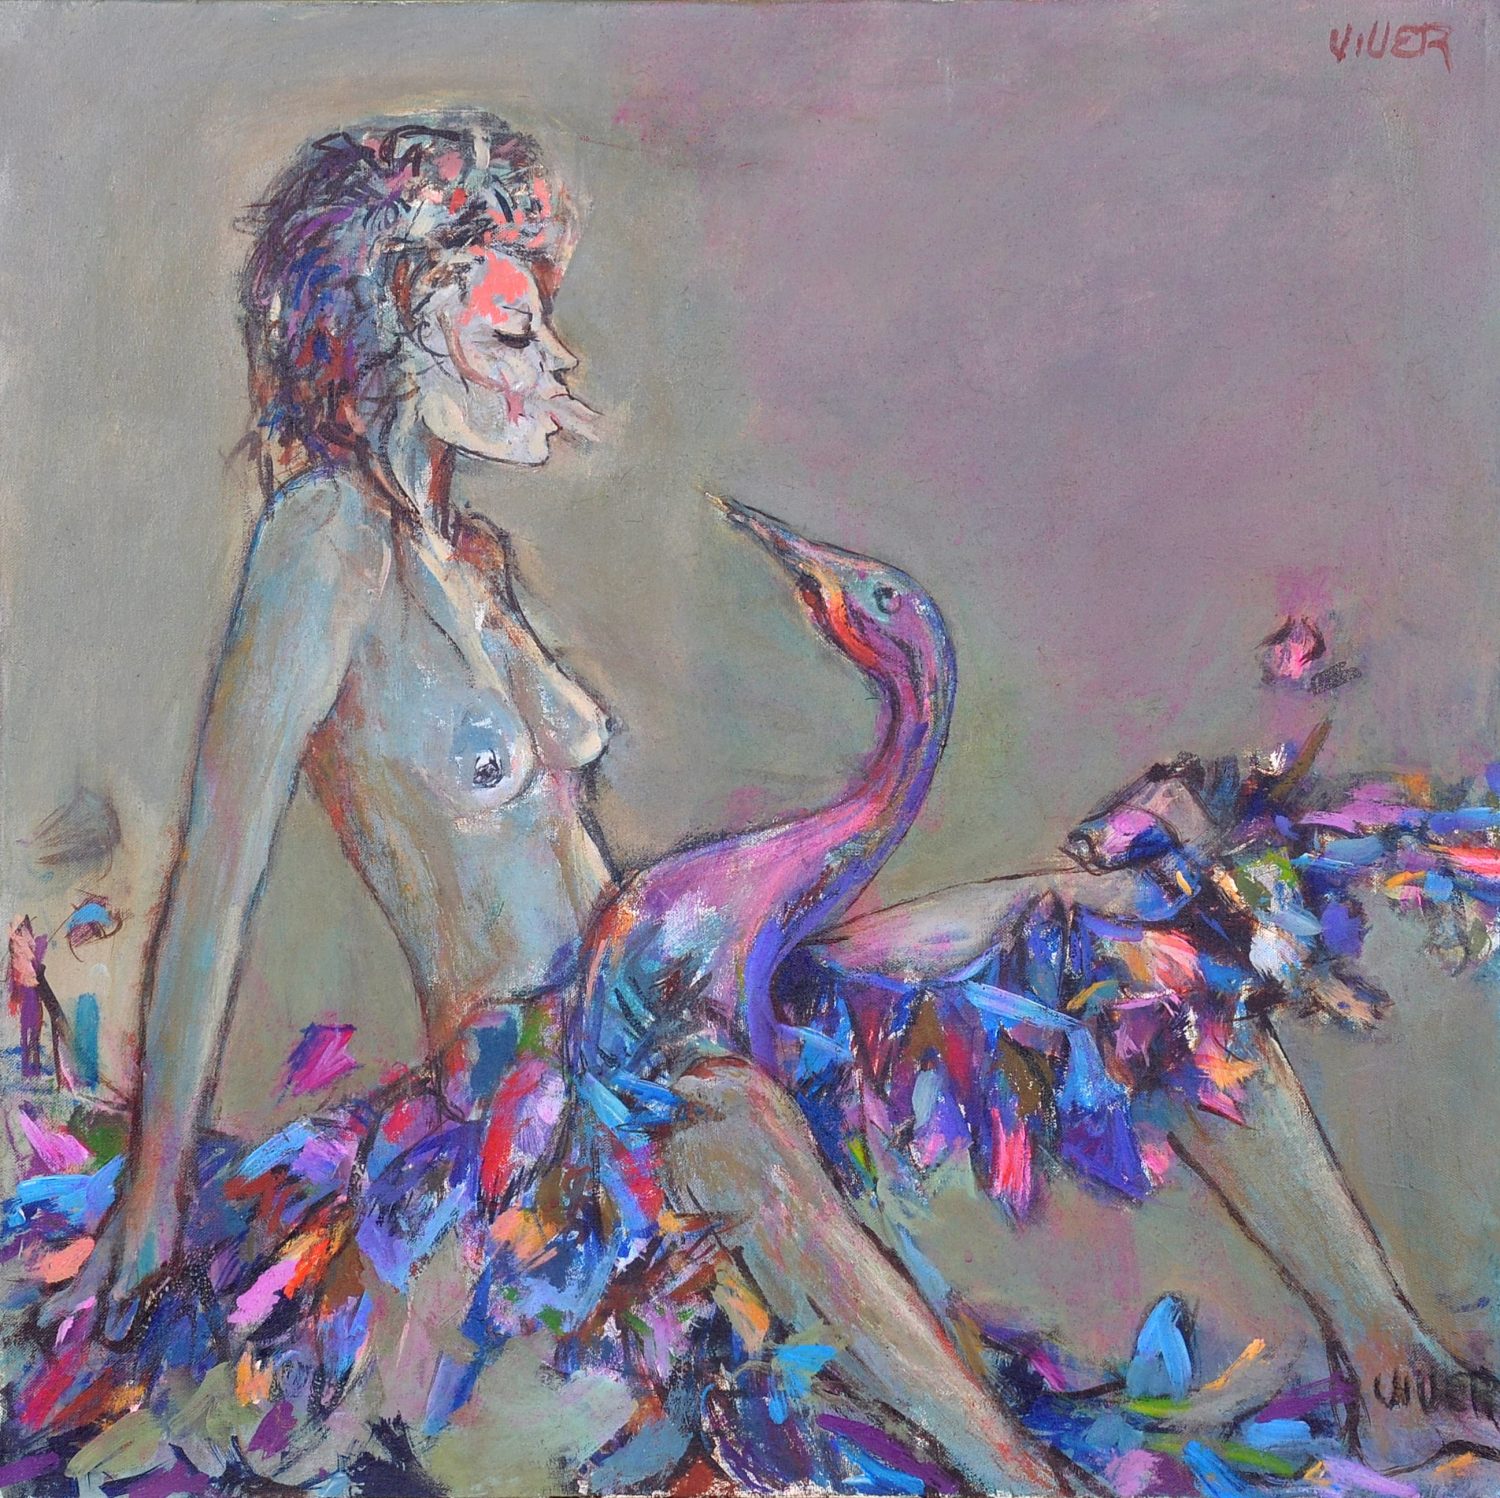 thumbnail of Leda and the Swan by Ecuadorian artist Carlos Viver. medium: acrylic on canvas. Dimensions: 23.6 x 23.6 inches. date: 1968